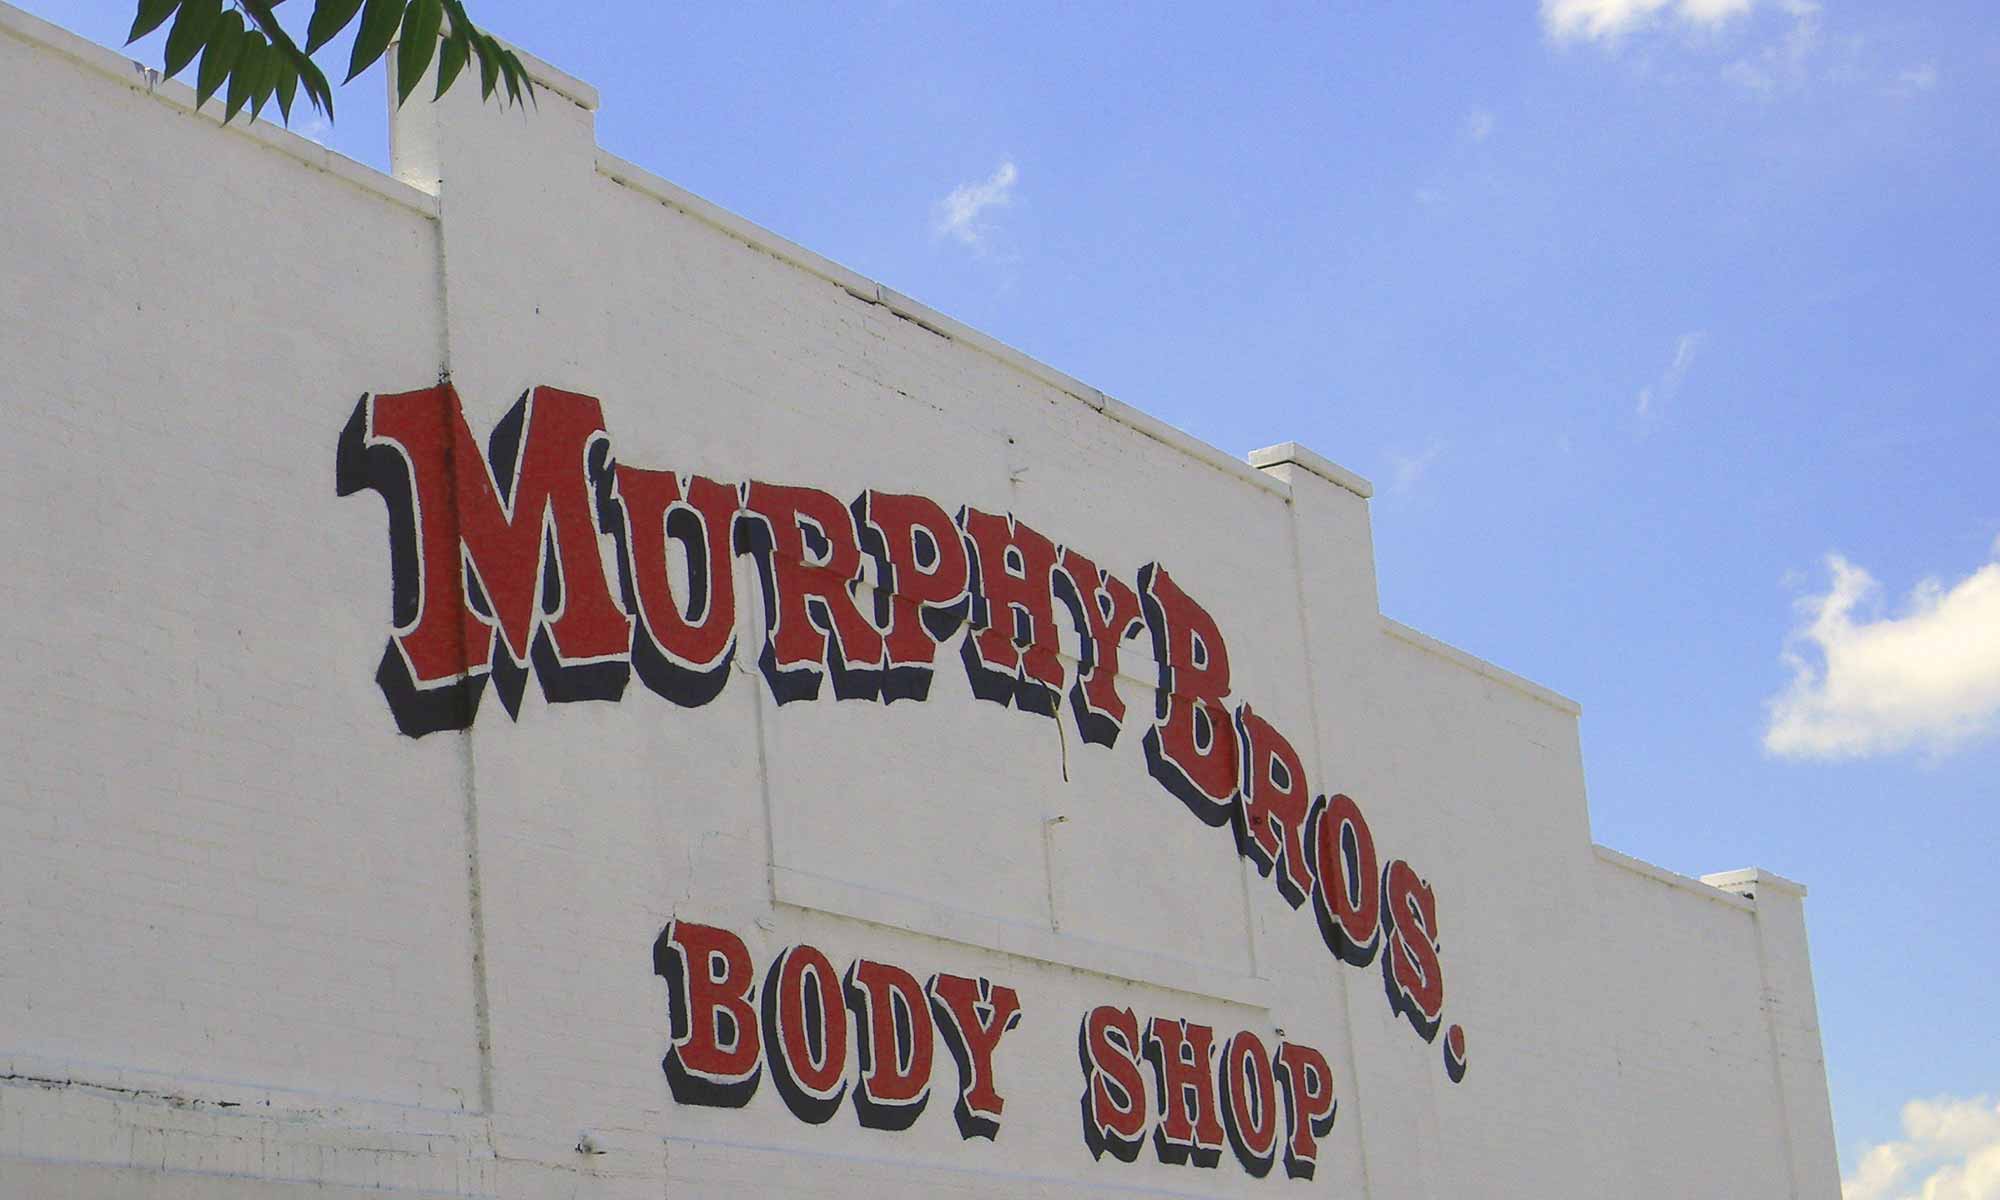 The Old Shop at Murphy Bros. Auto Body